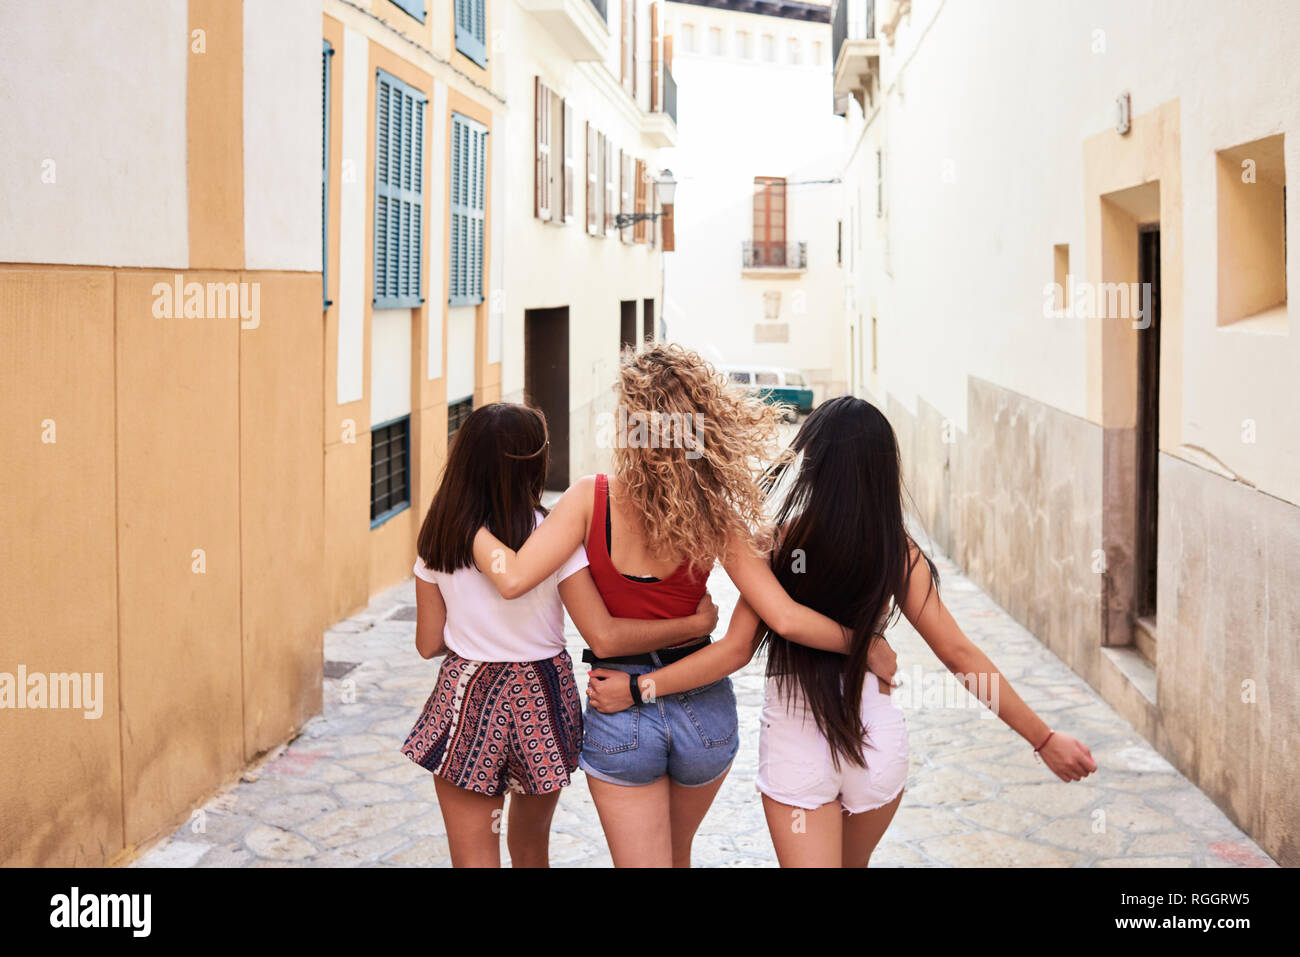 Spain, Mallorca, Palma, rear view of three young women walking in the city embracing each other Stock Photo